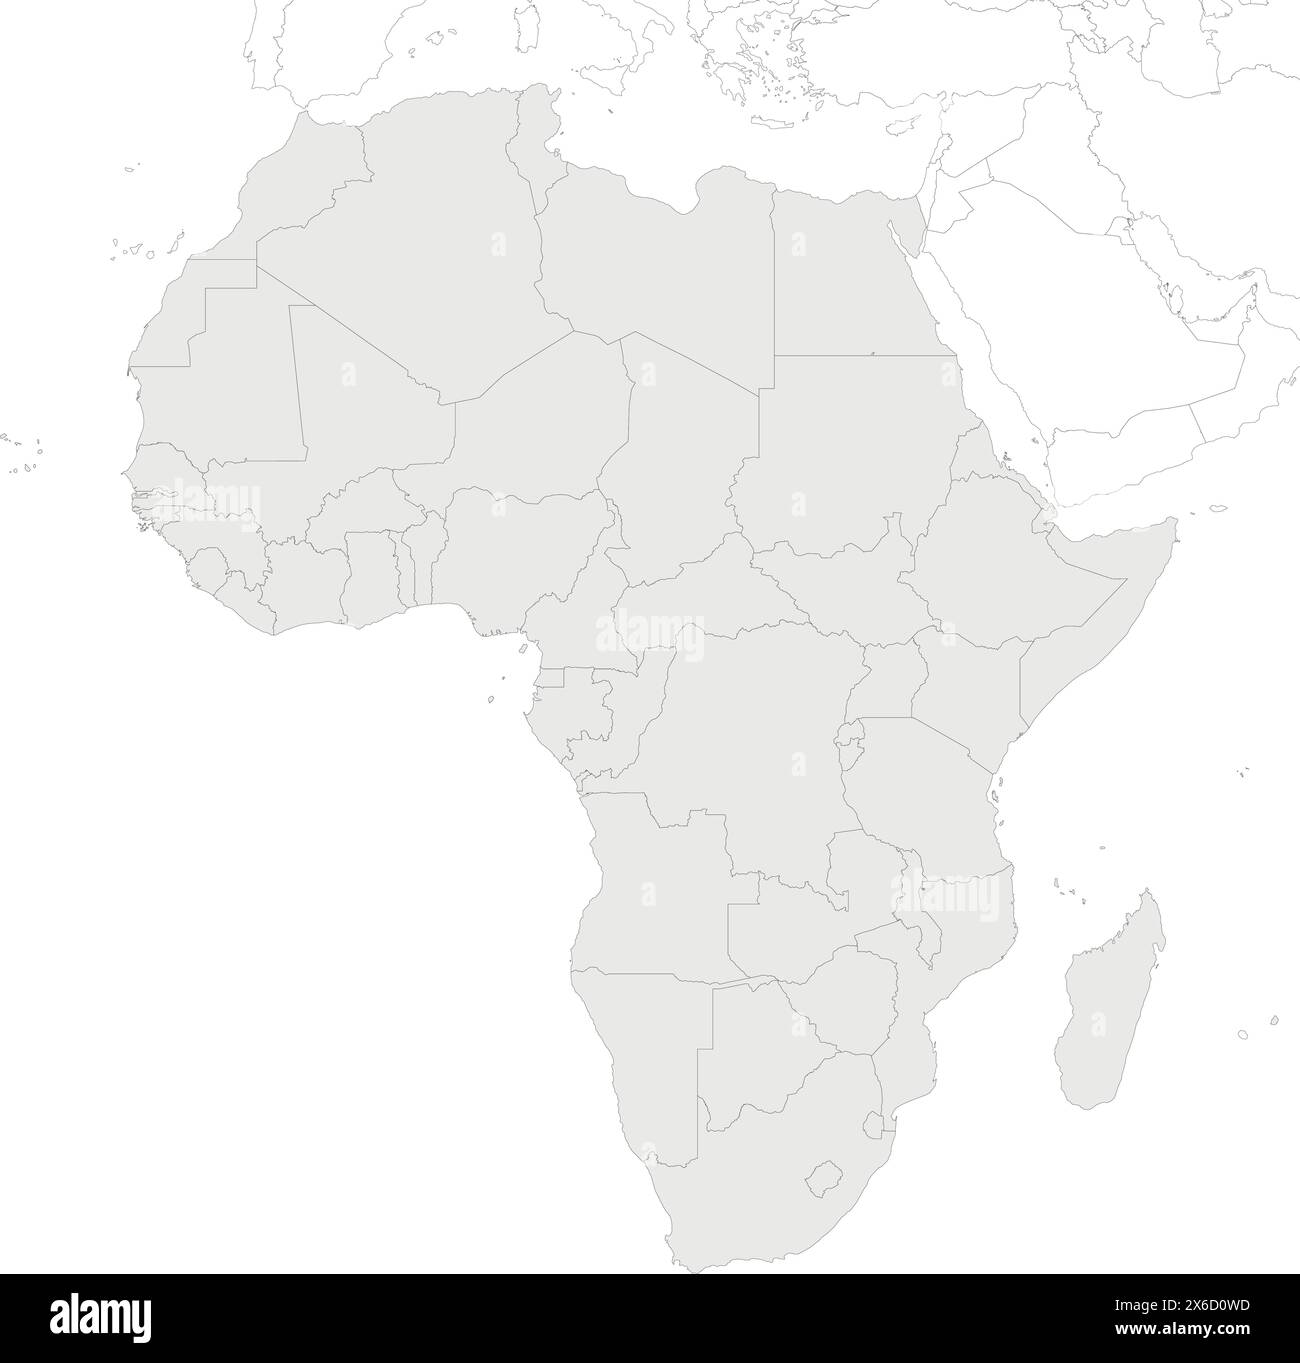 Blank Political Africa Map vector illustration isolated in white background. Editable and clearly labeled layers. Stock Vector